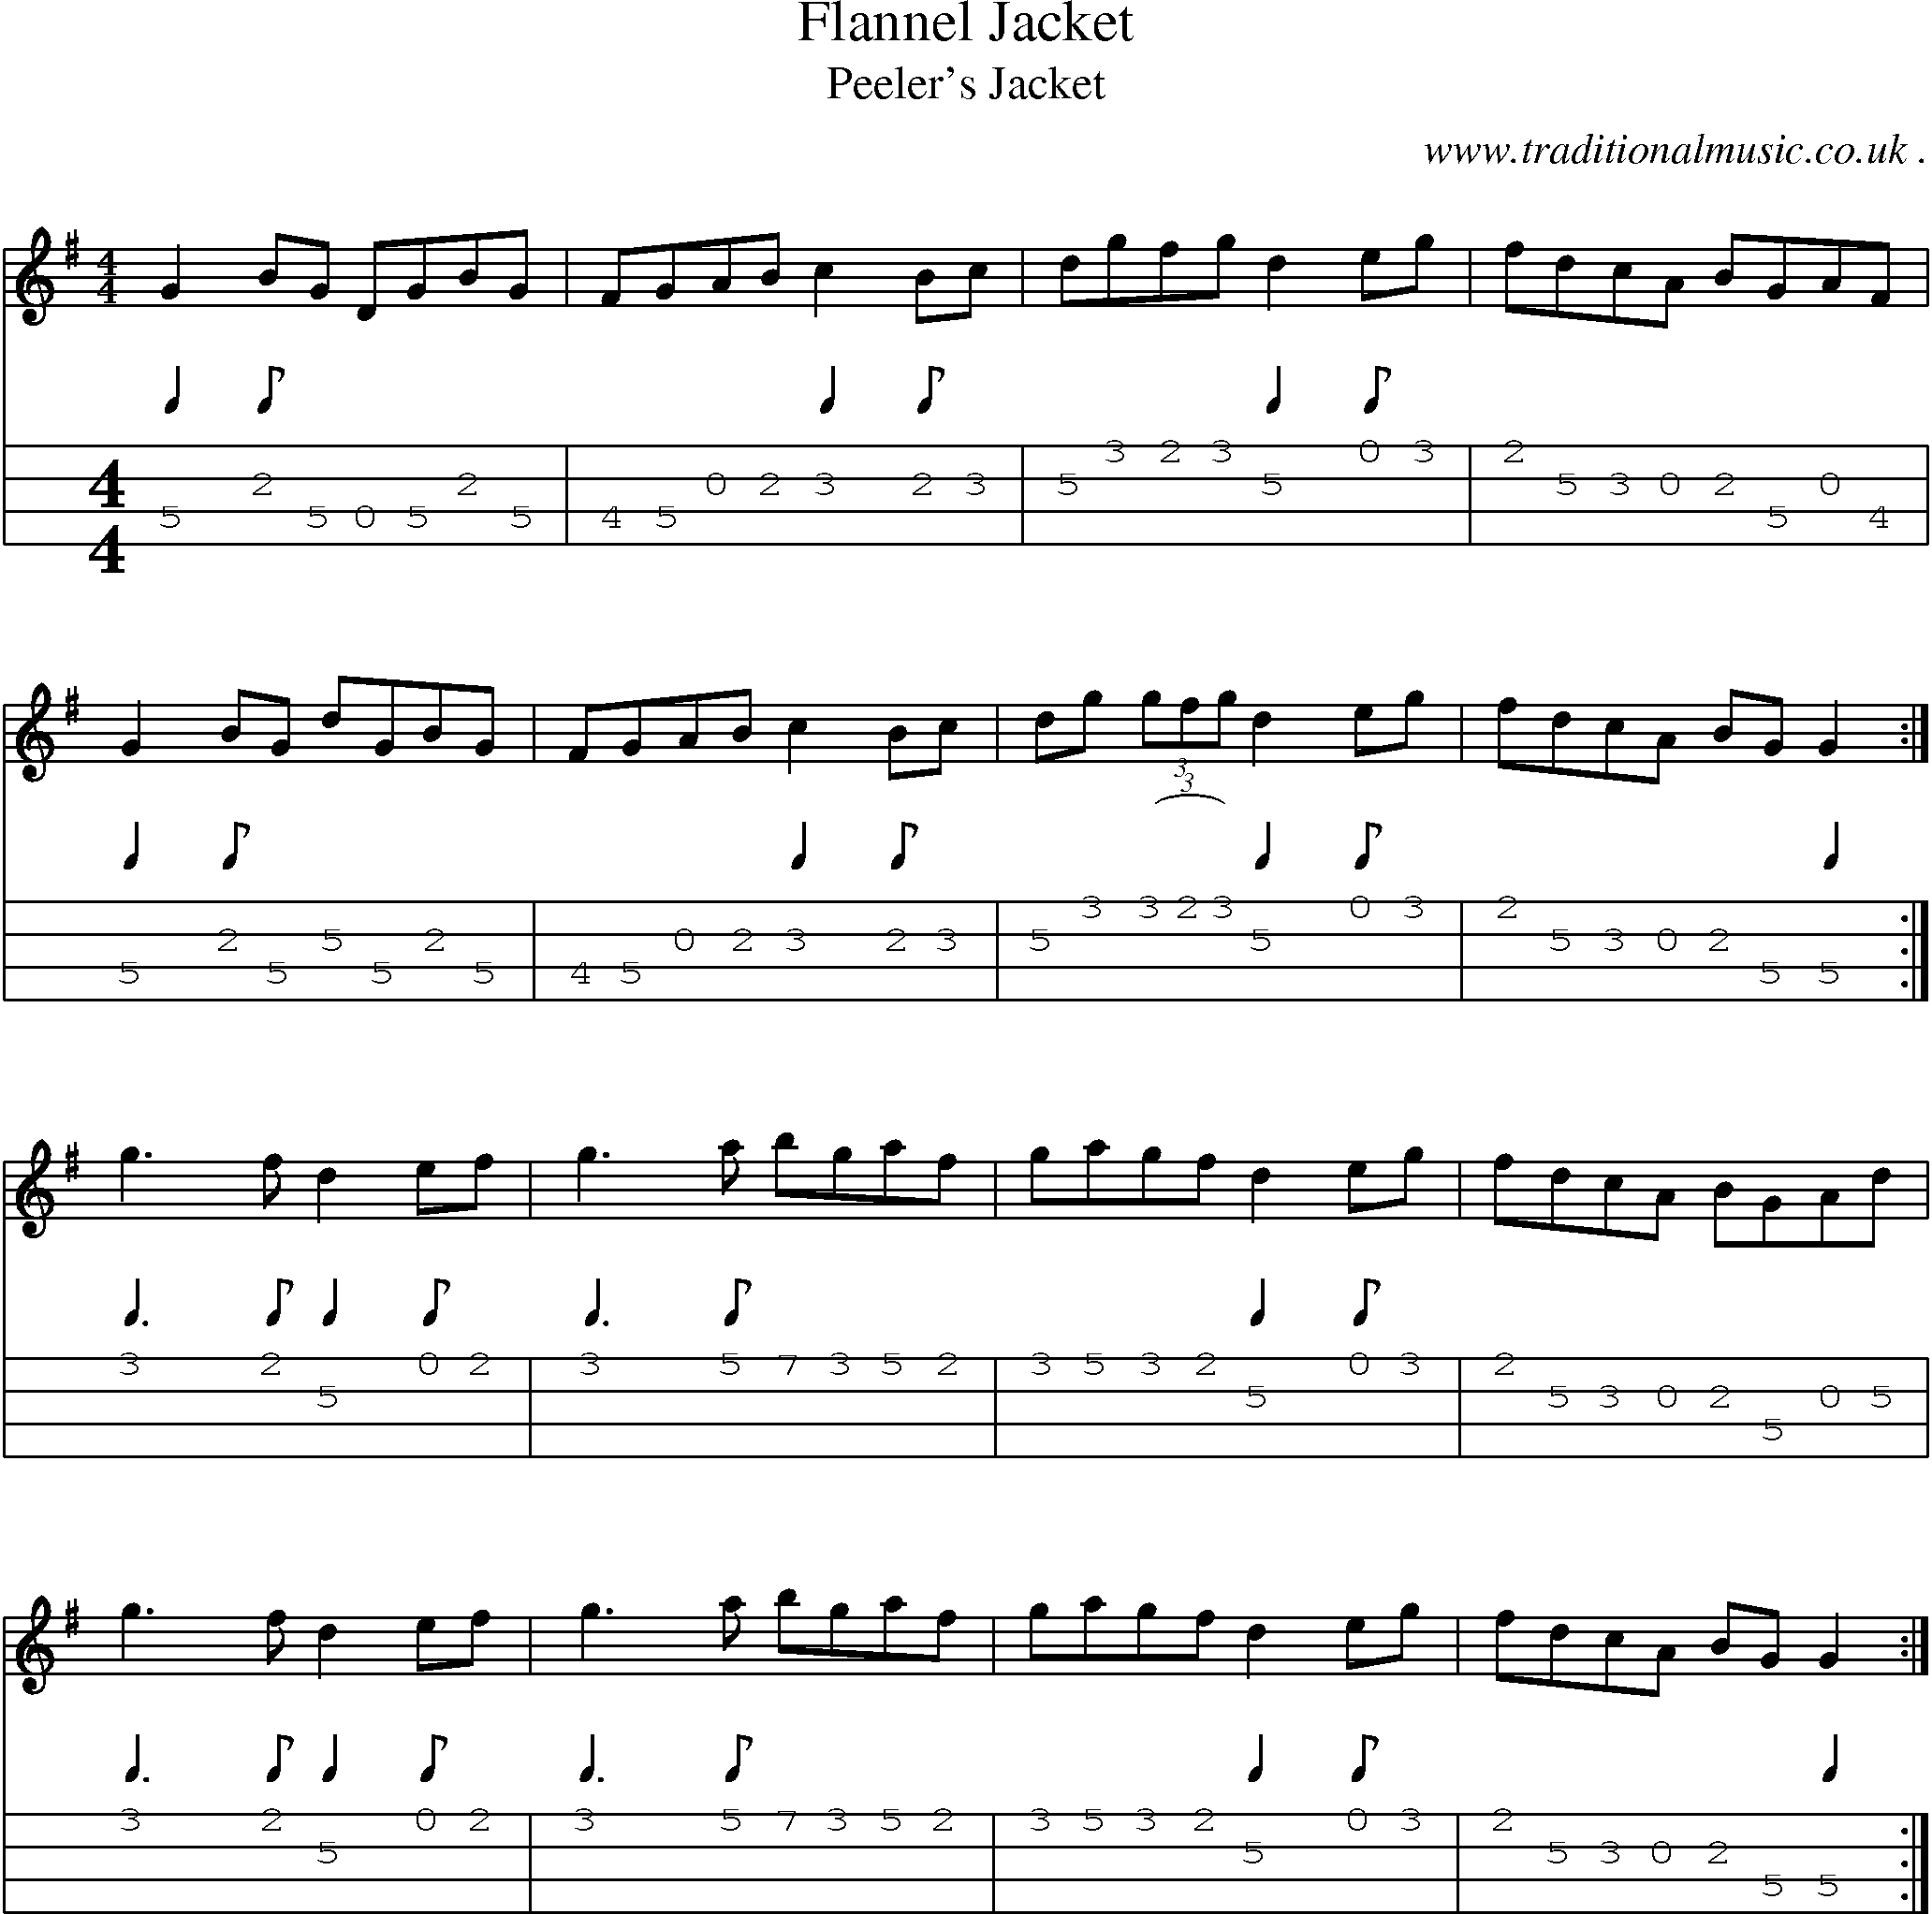 Sheet-Music and Mandolin Tabs for Flannel Jacket